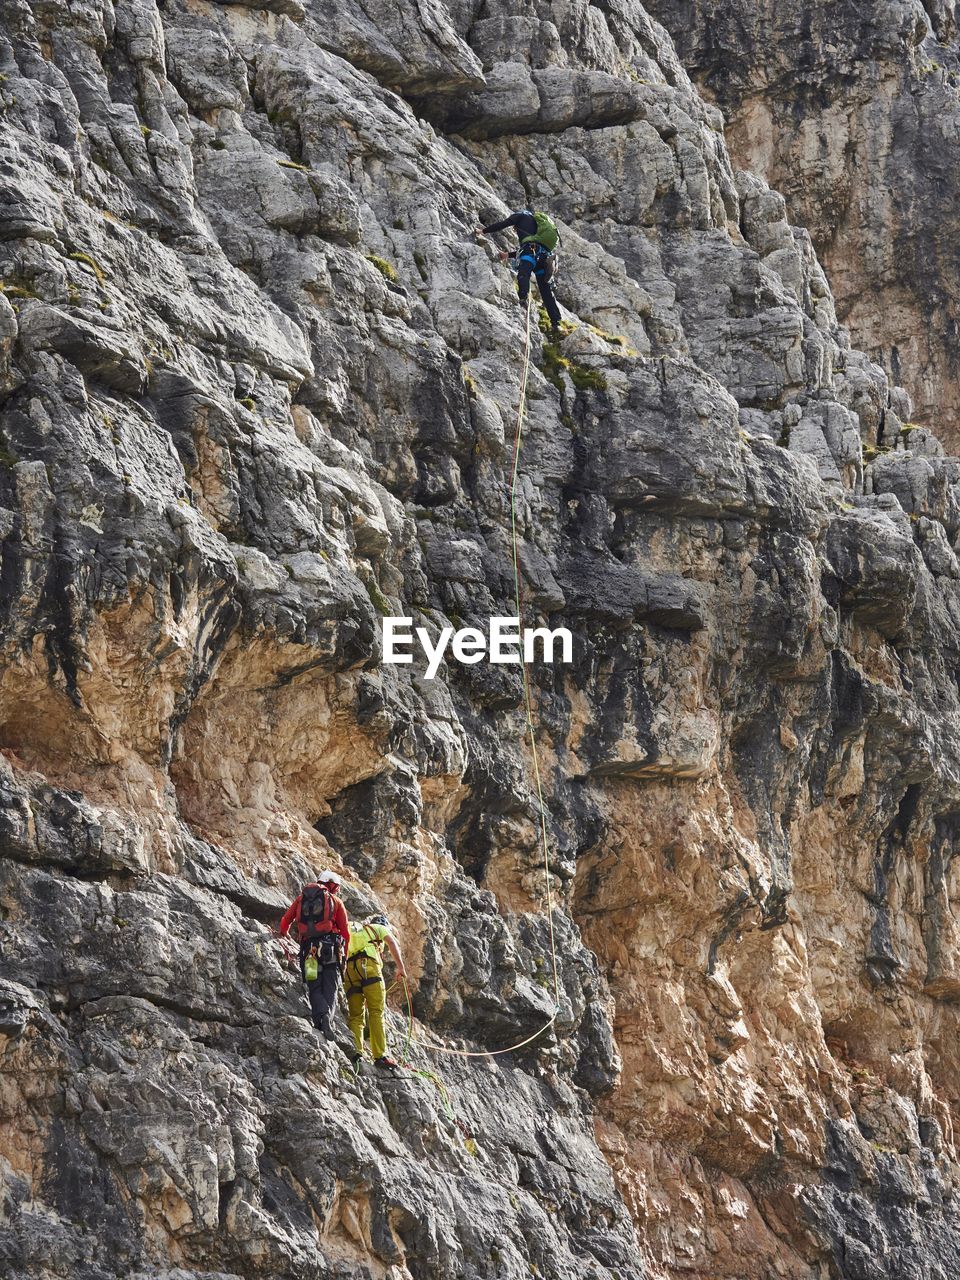 Low angle view of rock climbers in action